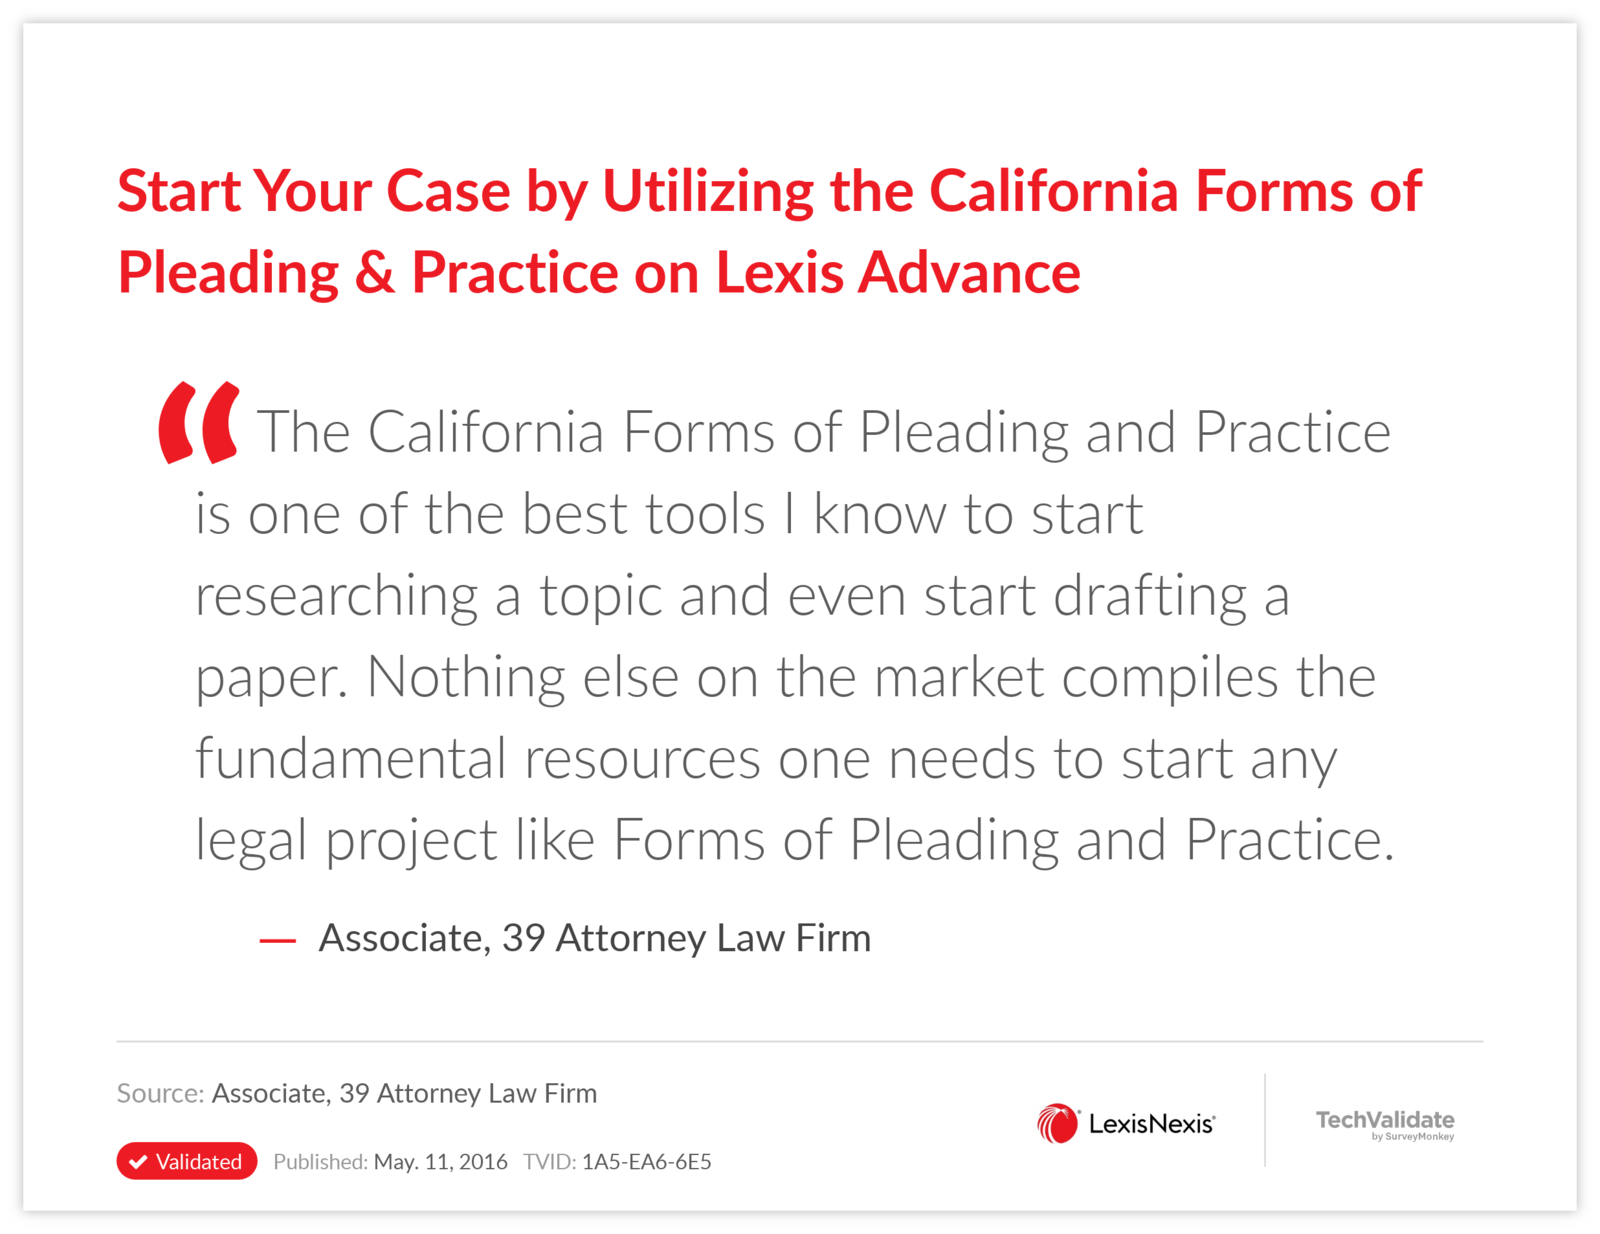 Start Your Case by Utilizing the California Forms of Pleading & Practice on Lexis Advance